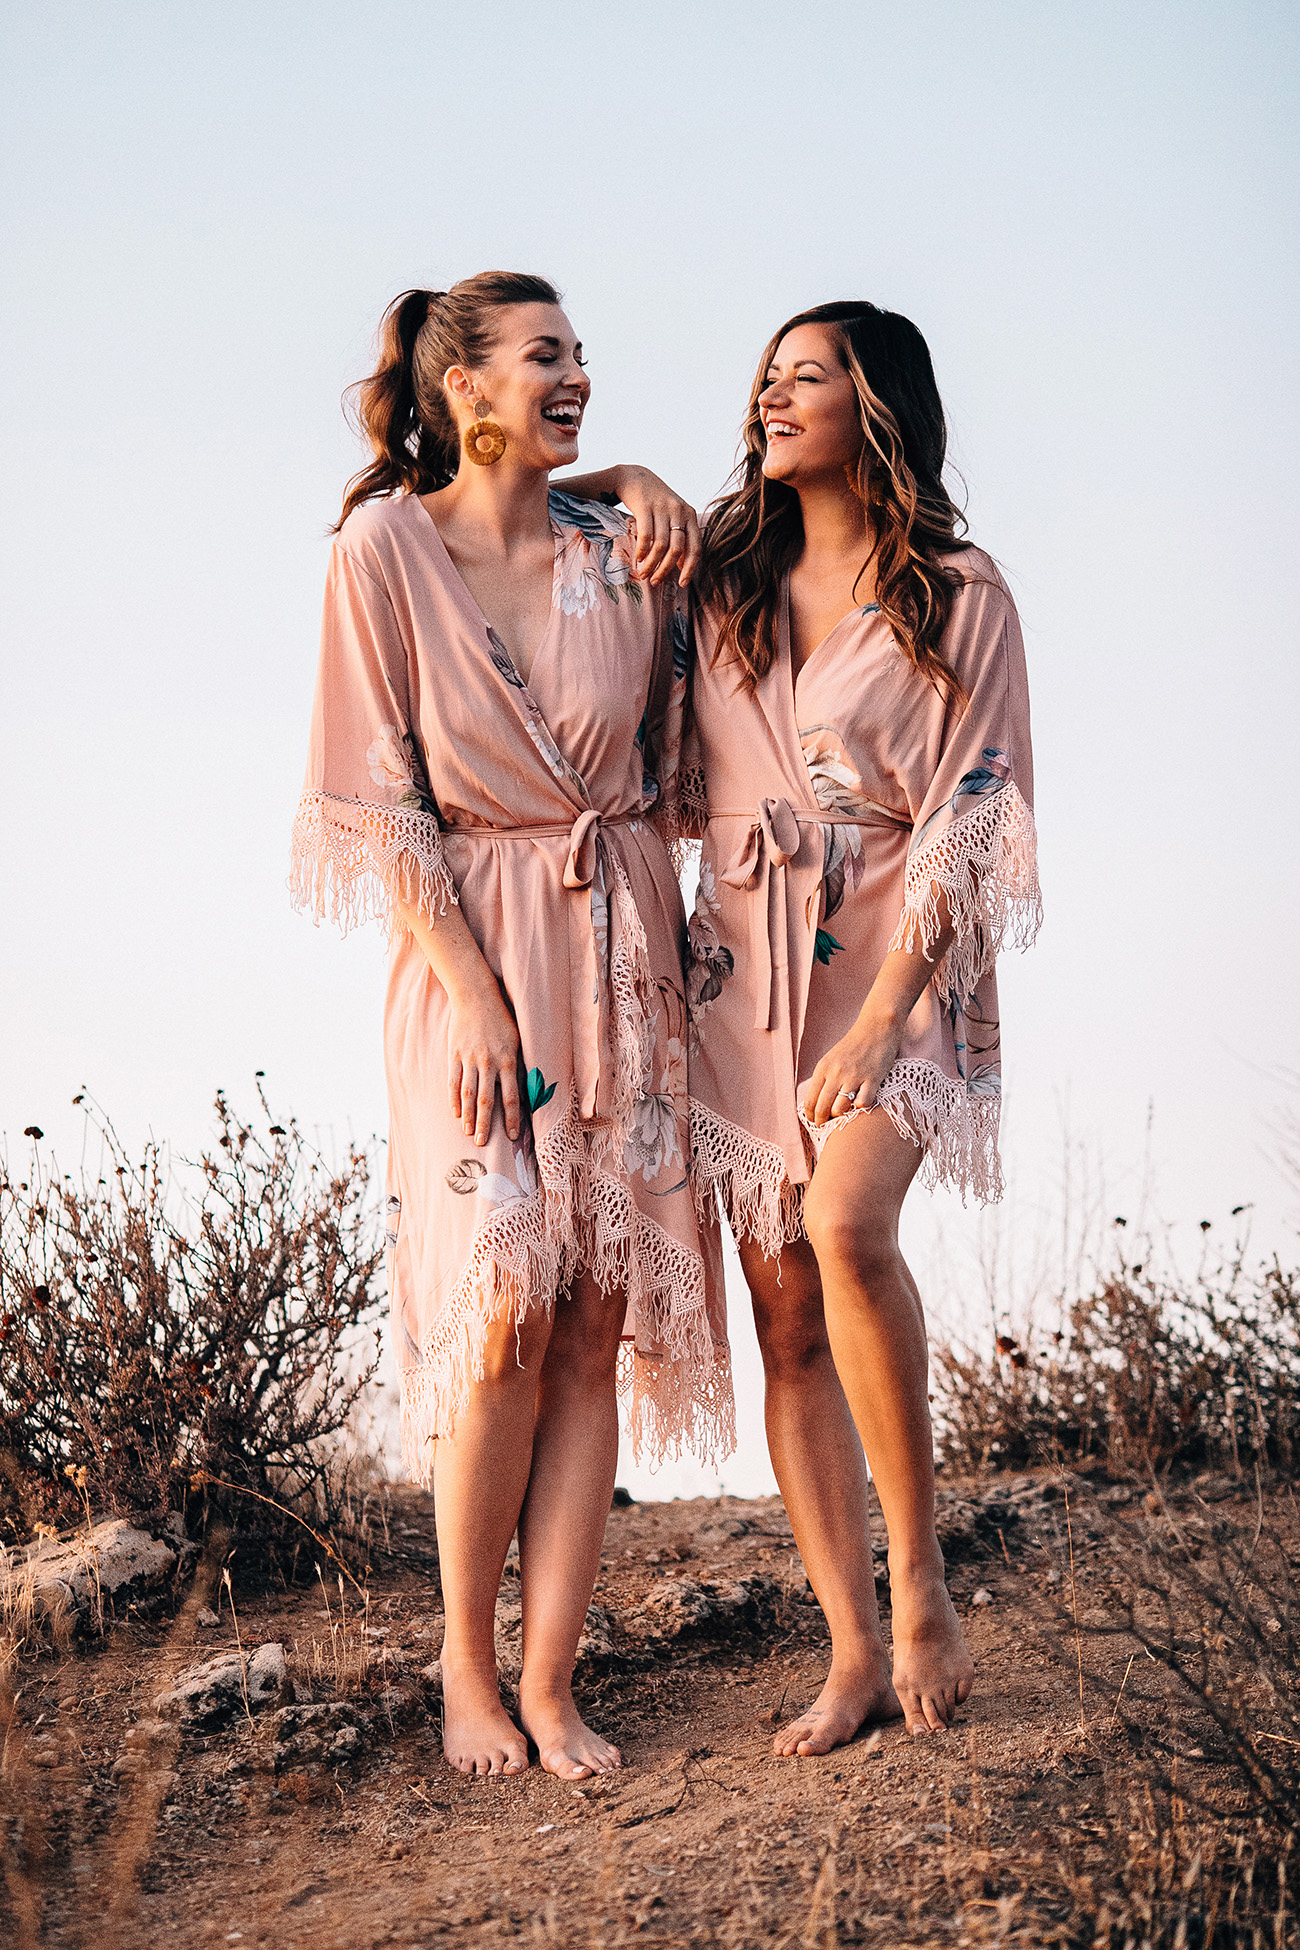 chic robes are amazing for wearing them at the party and after it, too